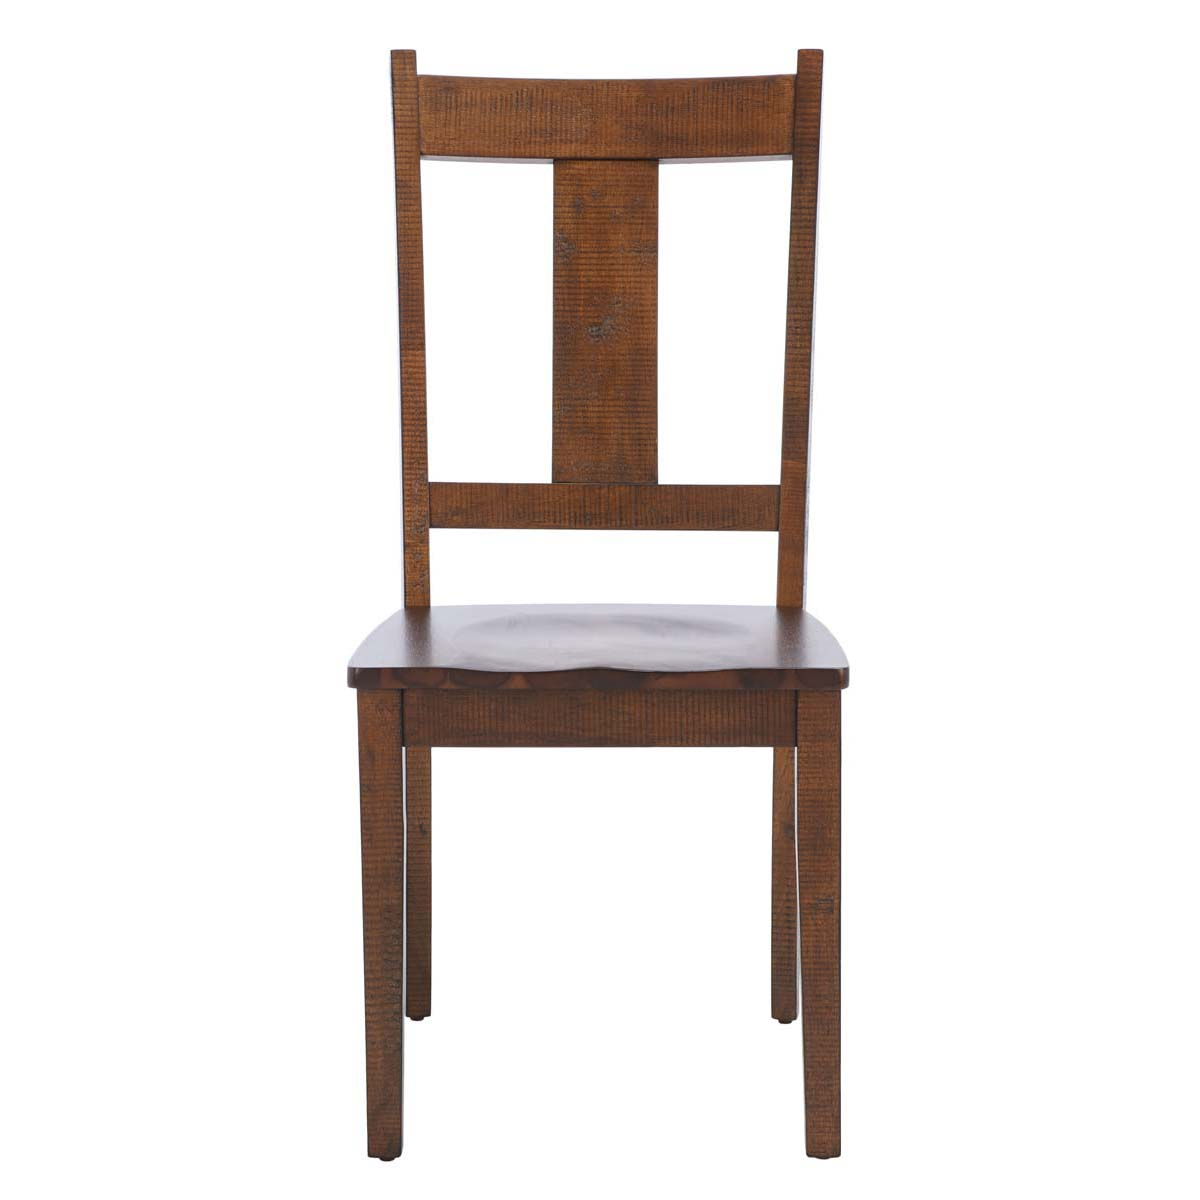 Safavieh Sergio Dining Chair, DCH9215 - Rustic Cafe (Set of 2)